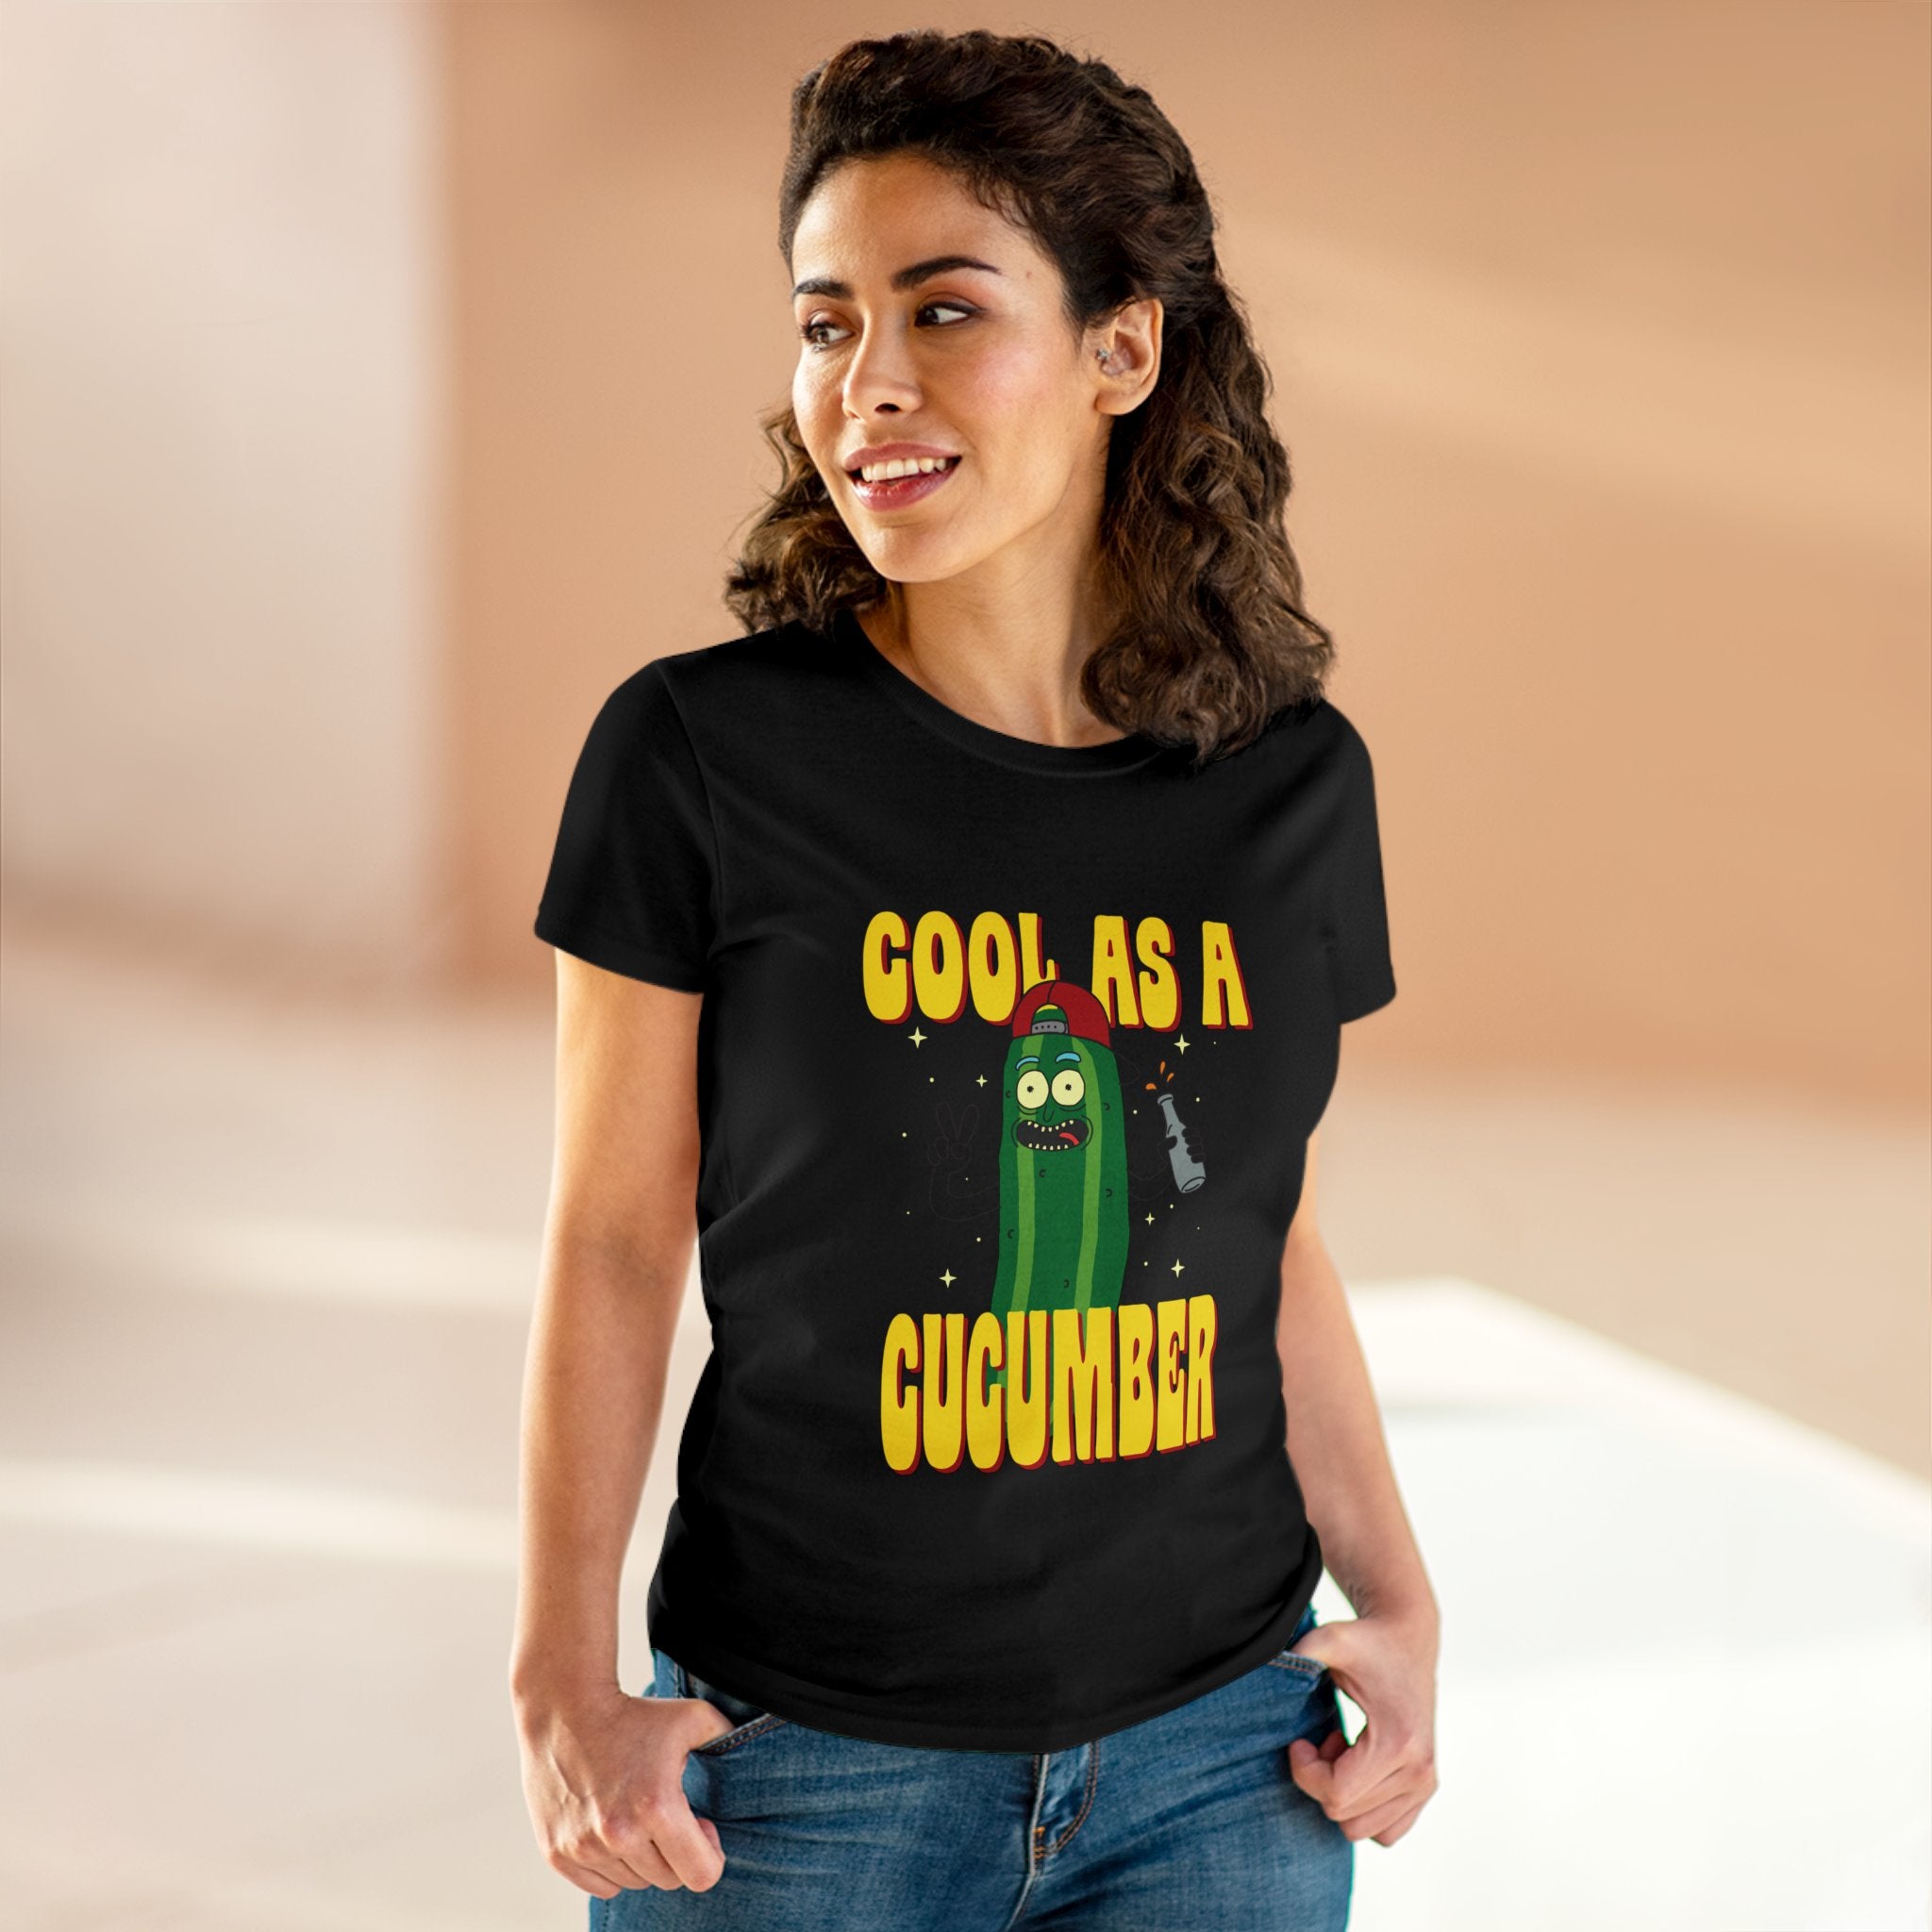 A person wearing a Cool as Cucumber - Women's Tee, sporting a semi-fitted silhouette, standing in a well-lit environment.